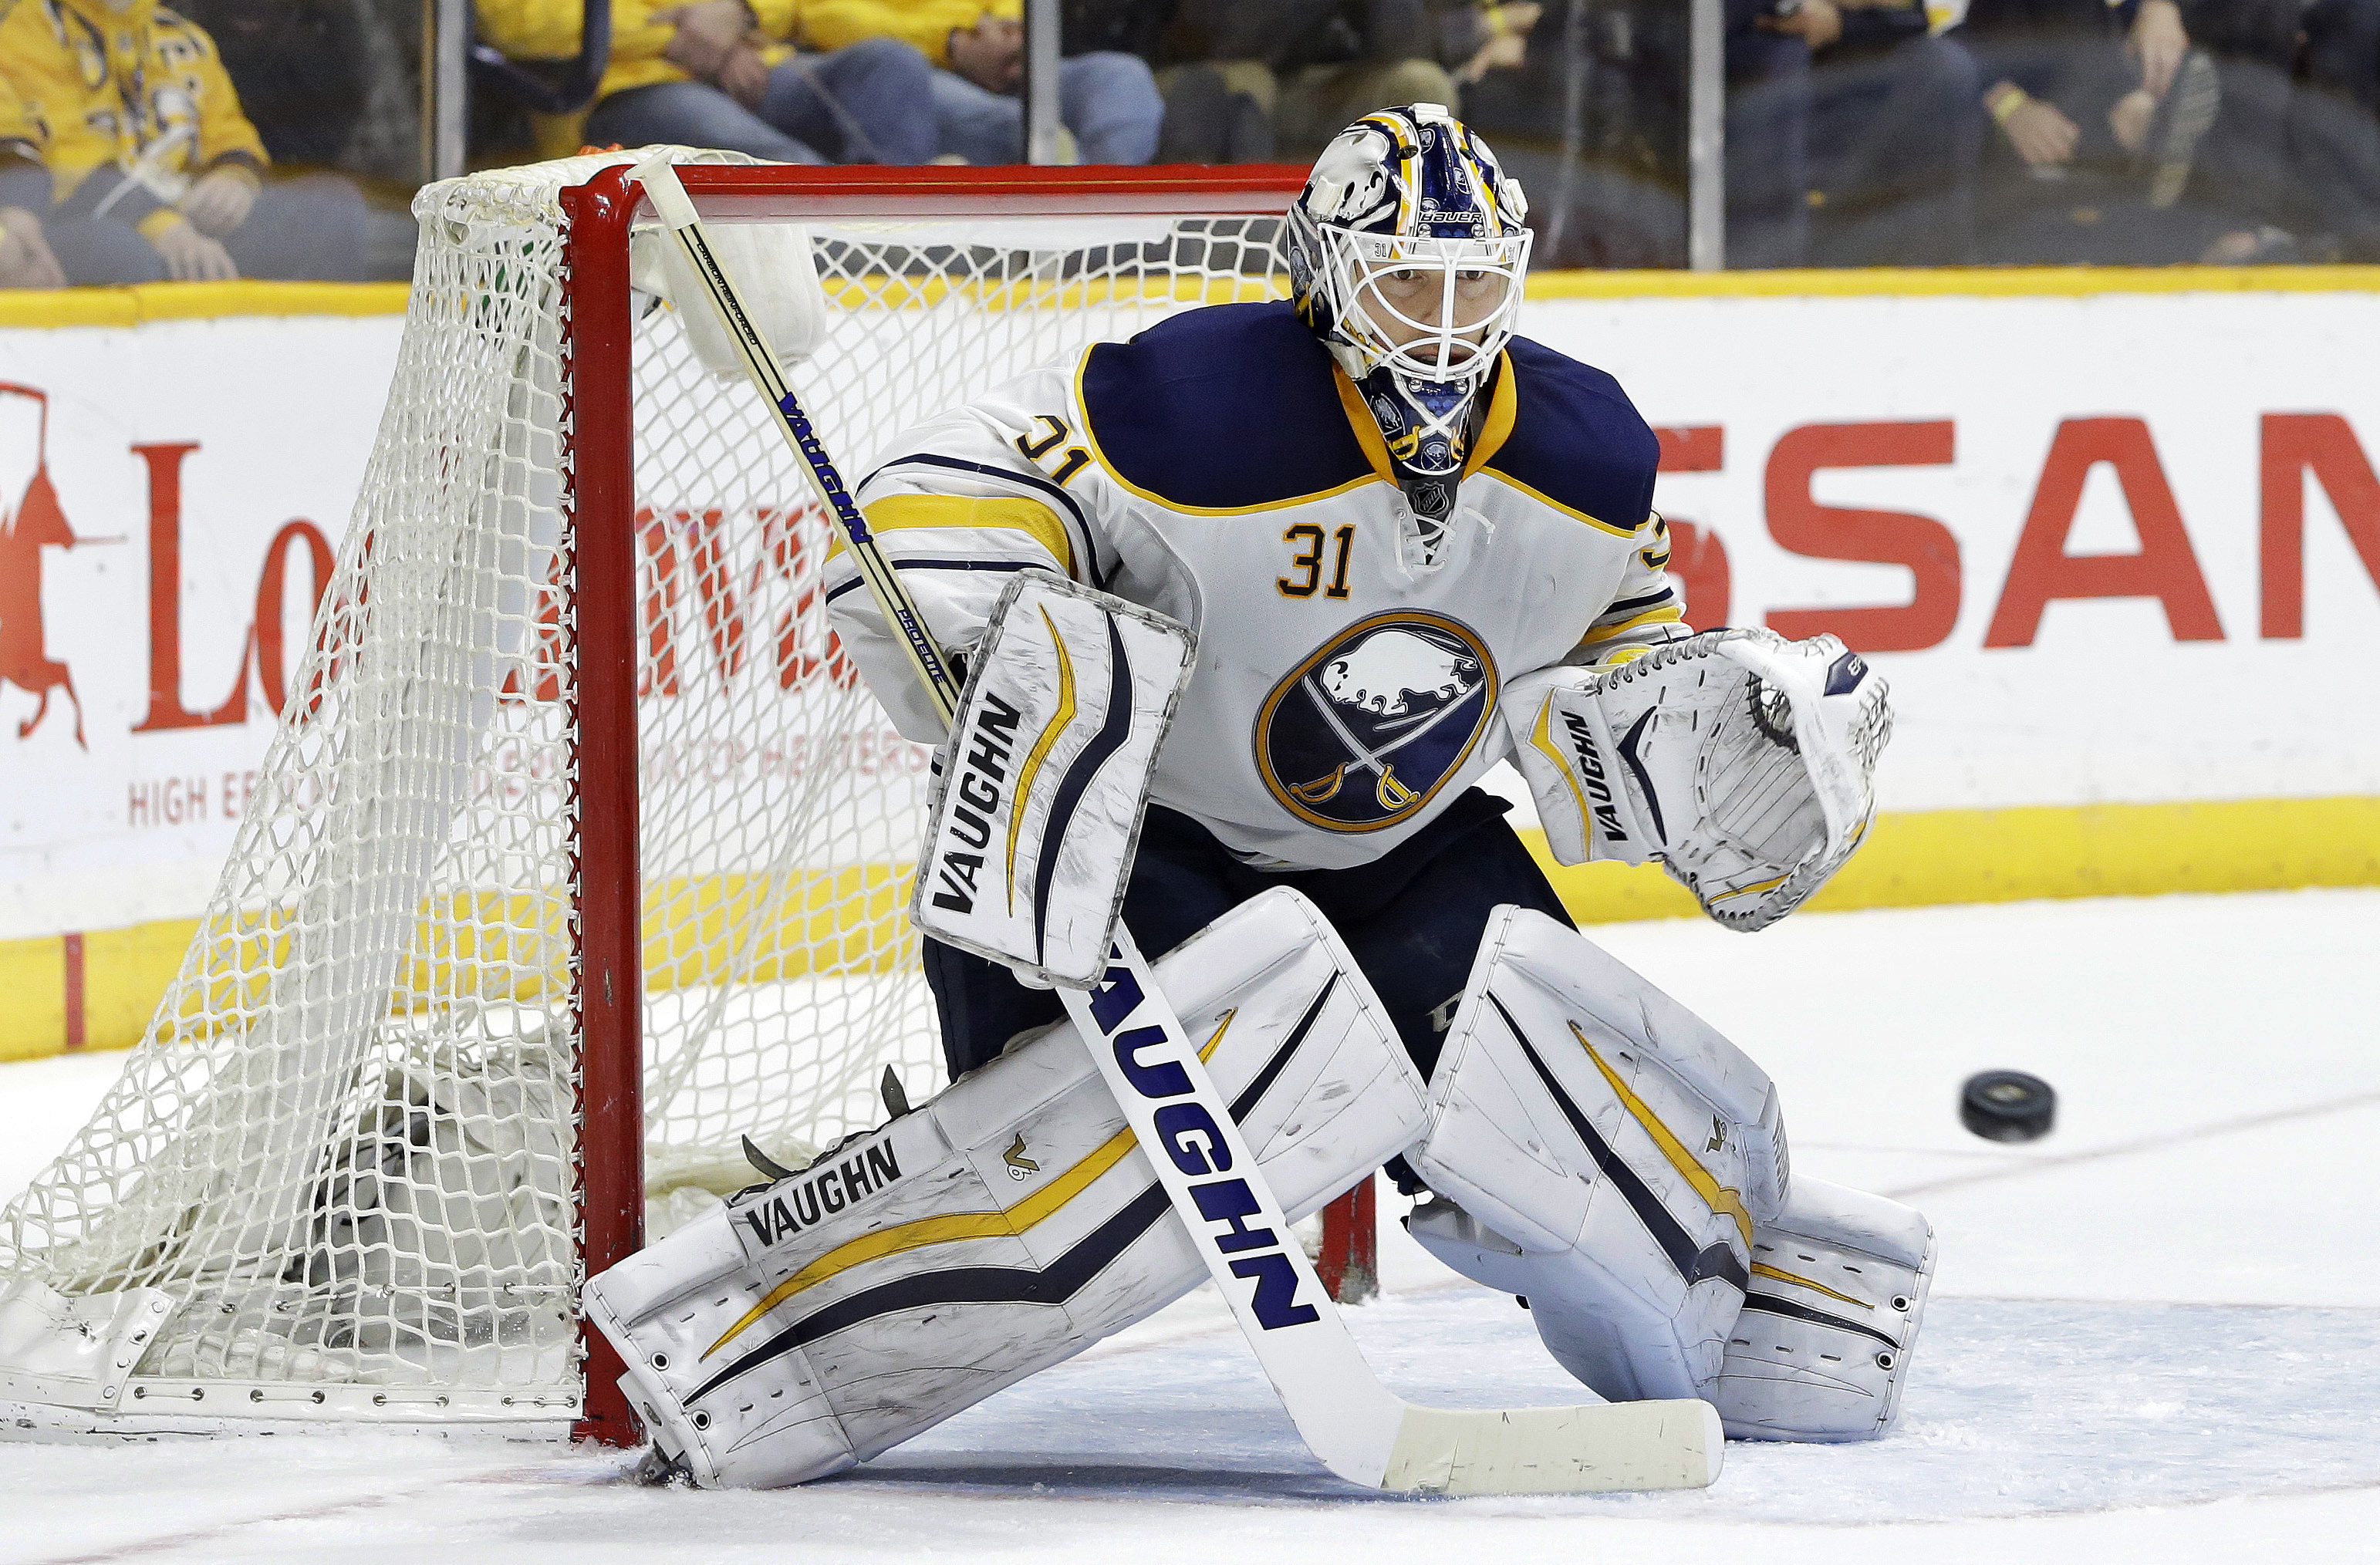 Sabres confirm they will not make qualifying offer to Robin Lehner